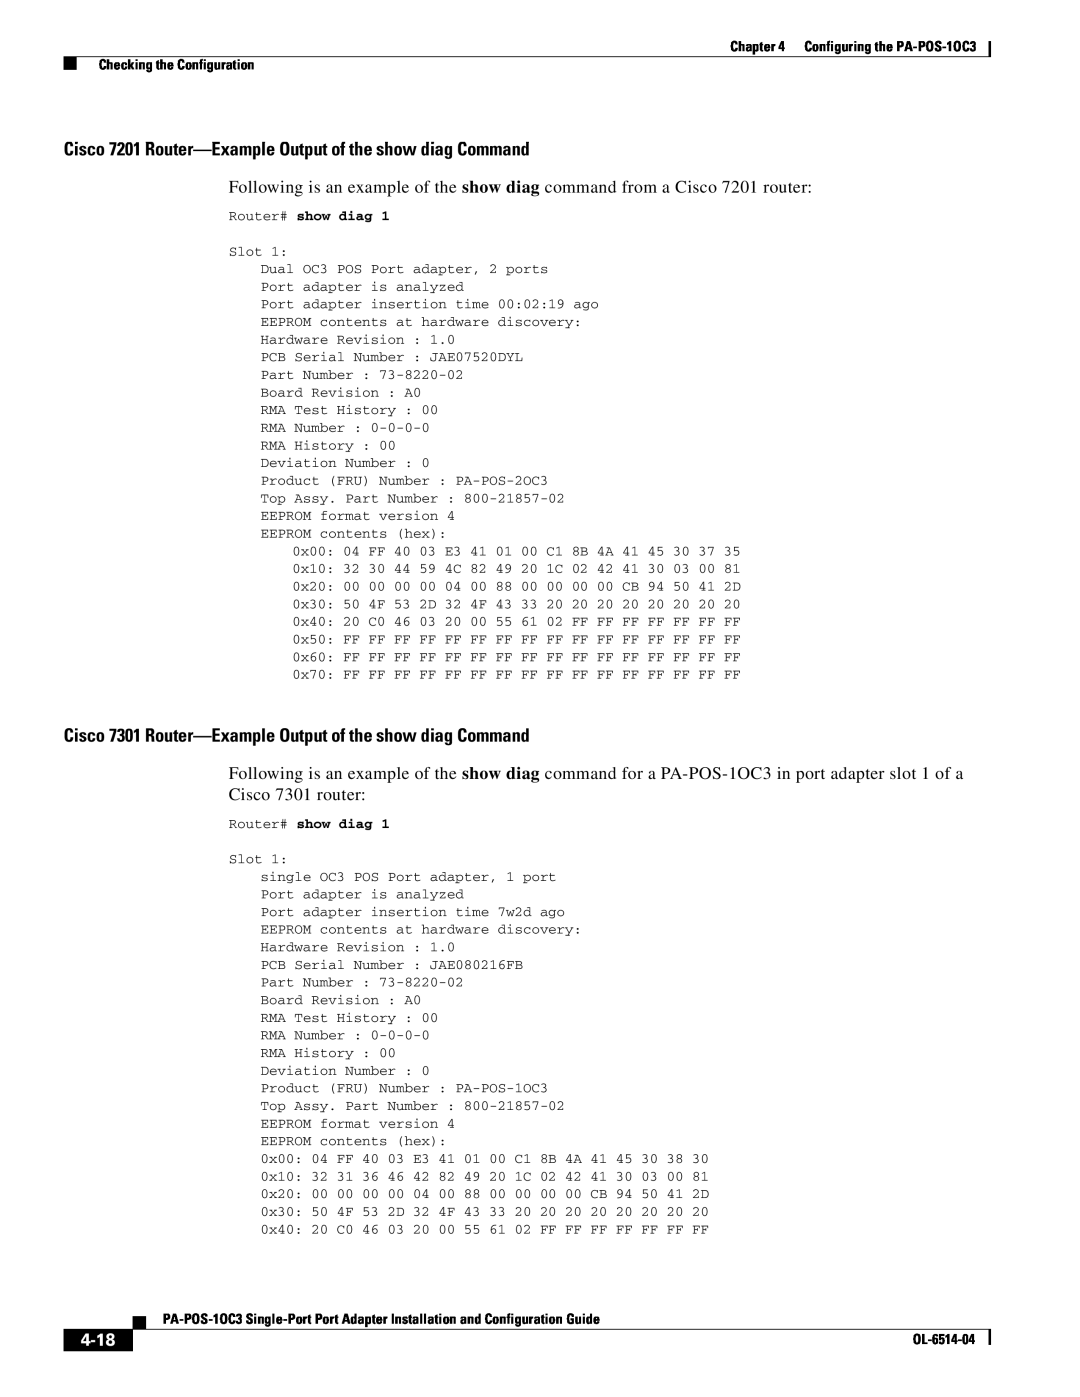 Cisco Systems PA-POS-2OC3, PA-POS-1OC3 manual Cisco 7201 Router-Example Output of the show diag Command, 4-18 